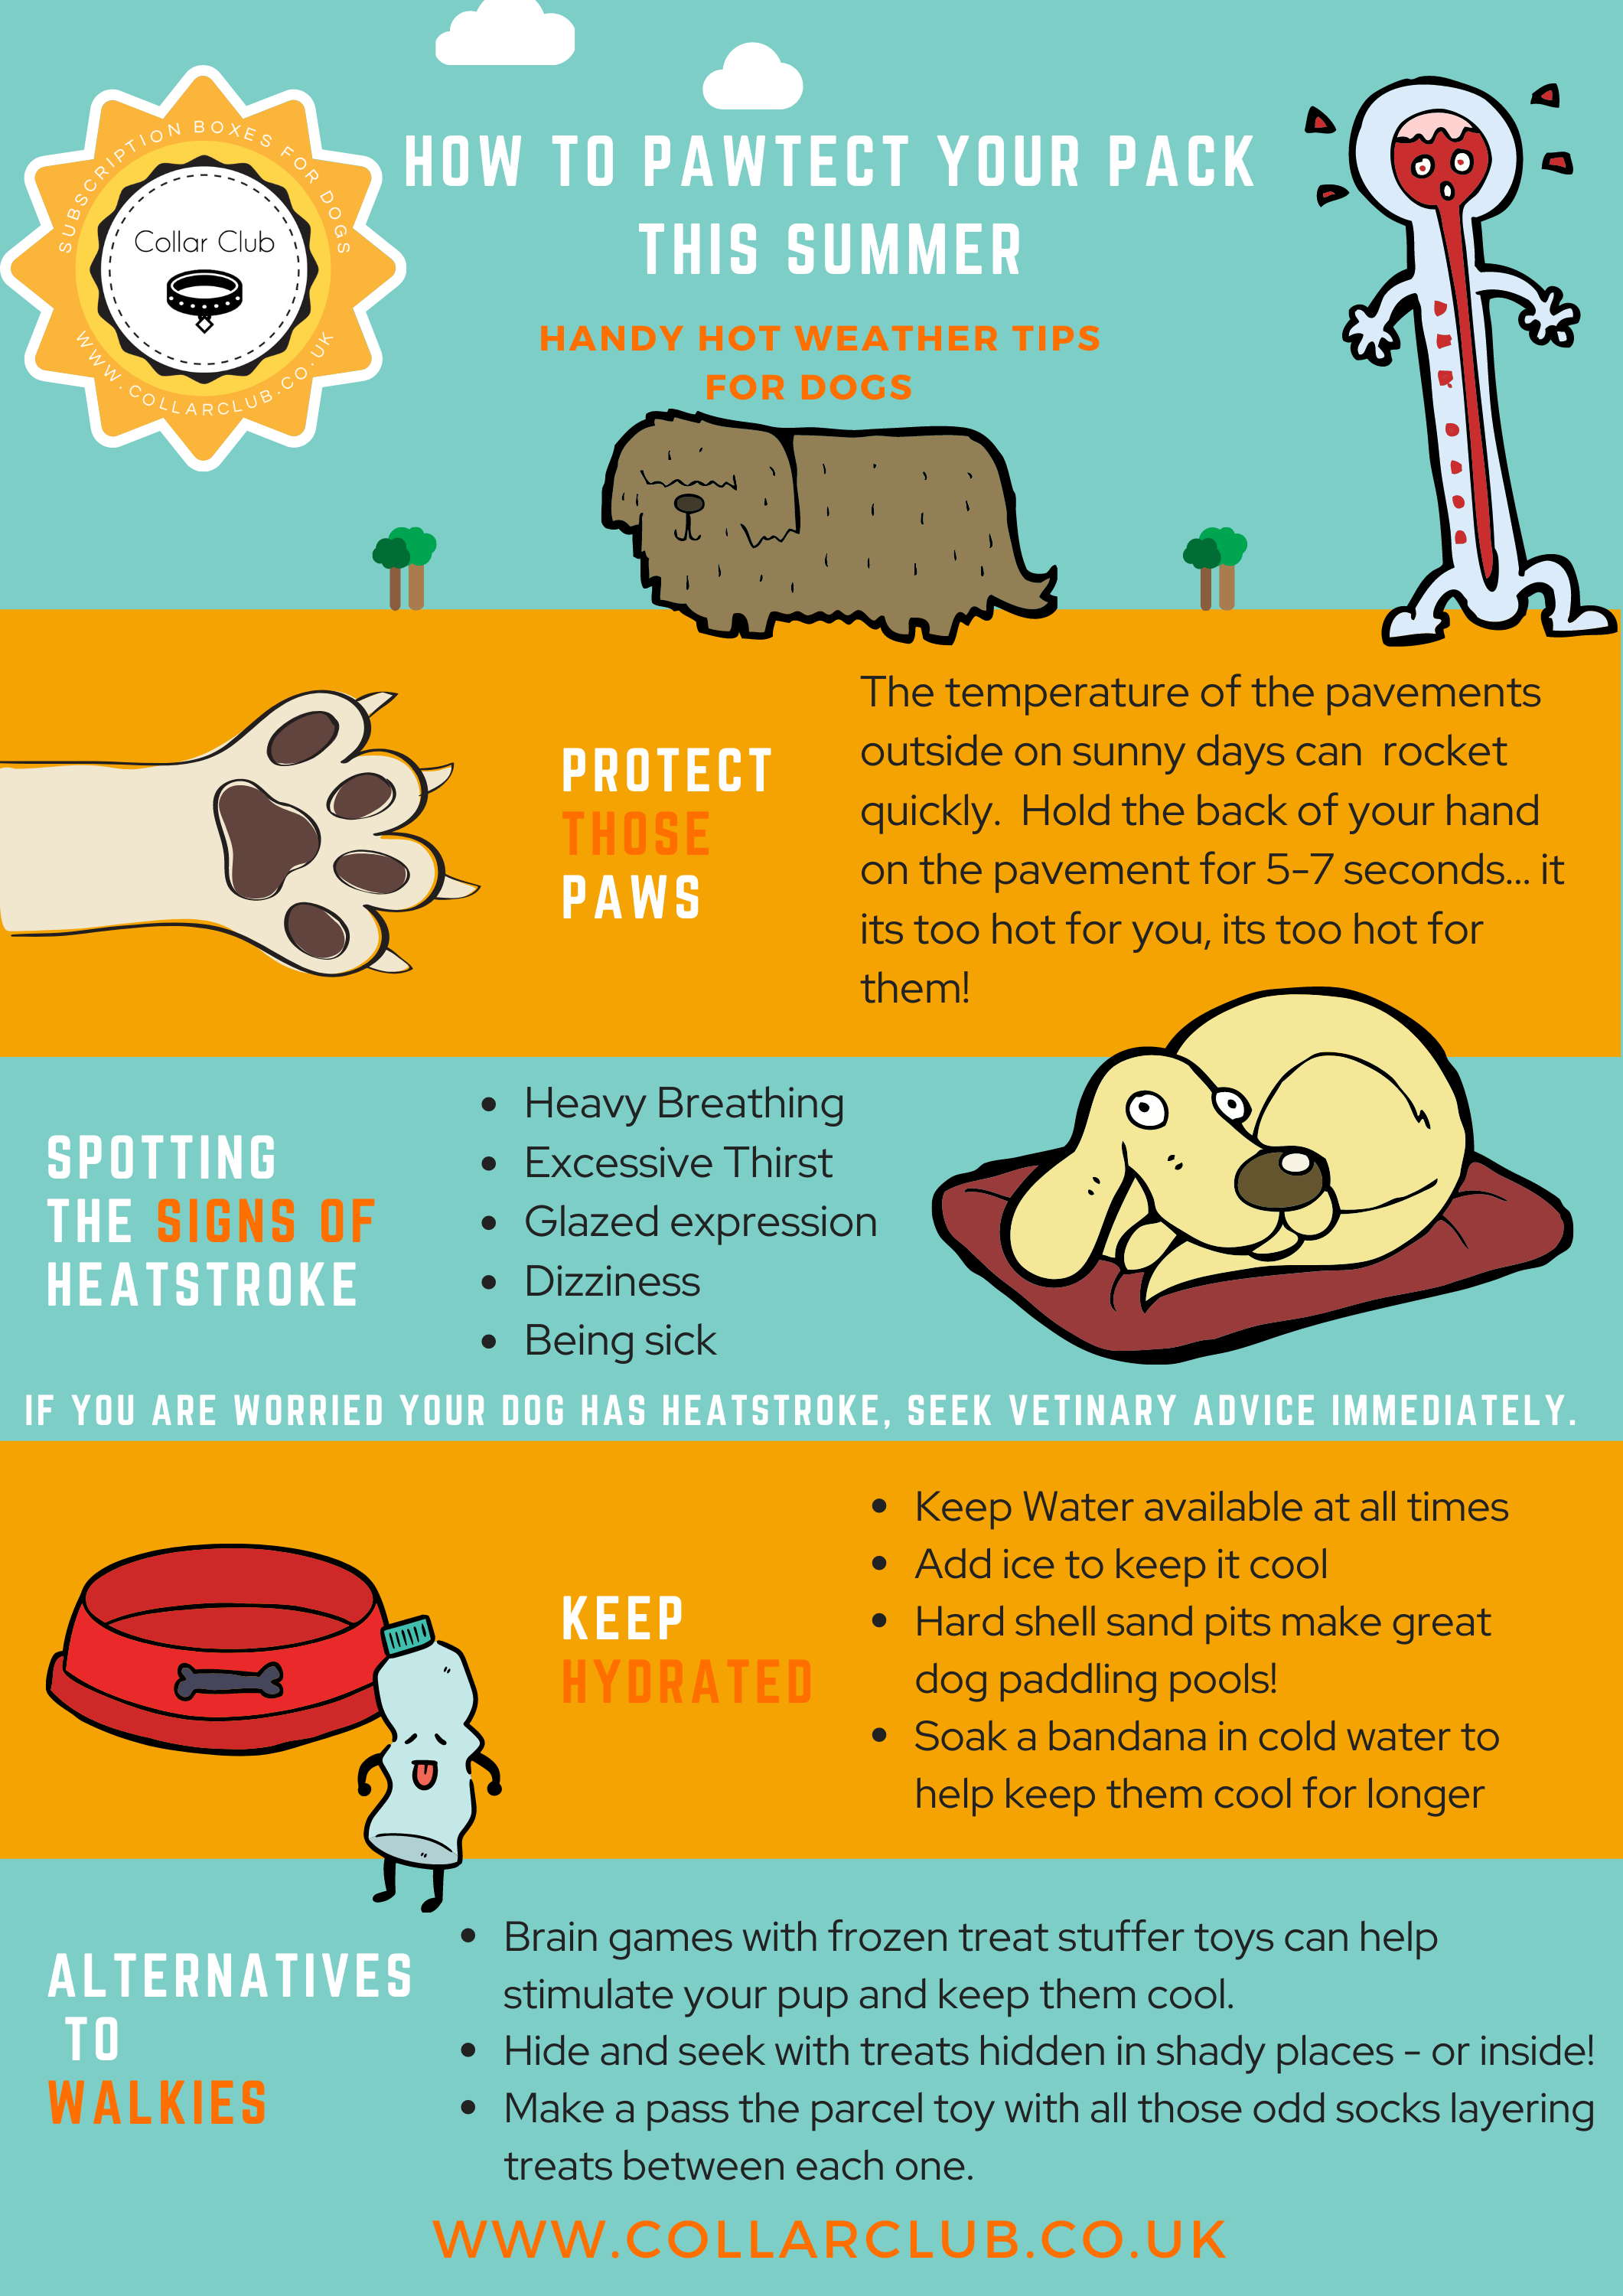 Top Tips For Keeping Your Dog Safe in Summer